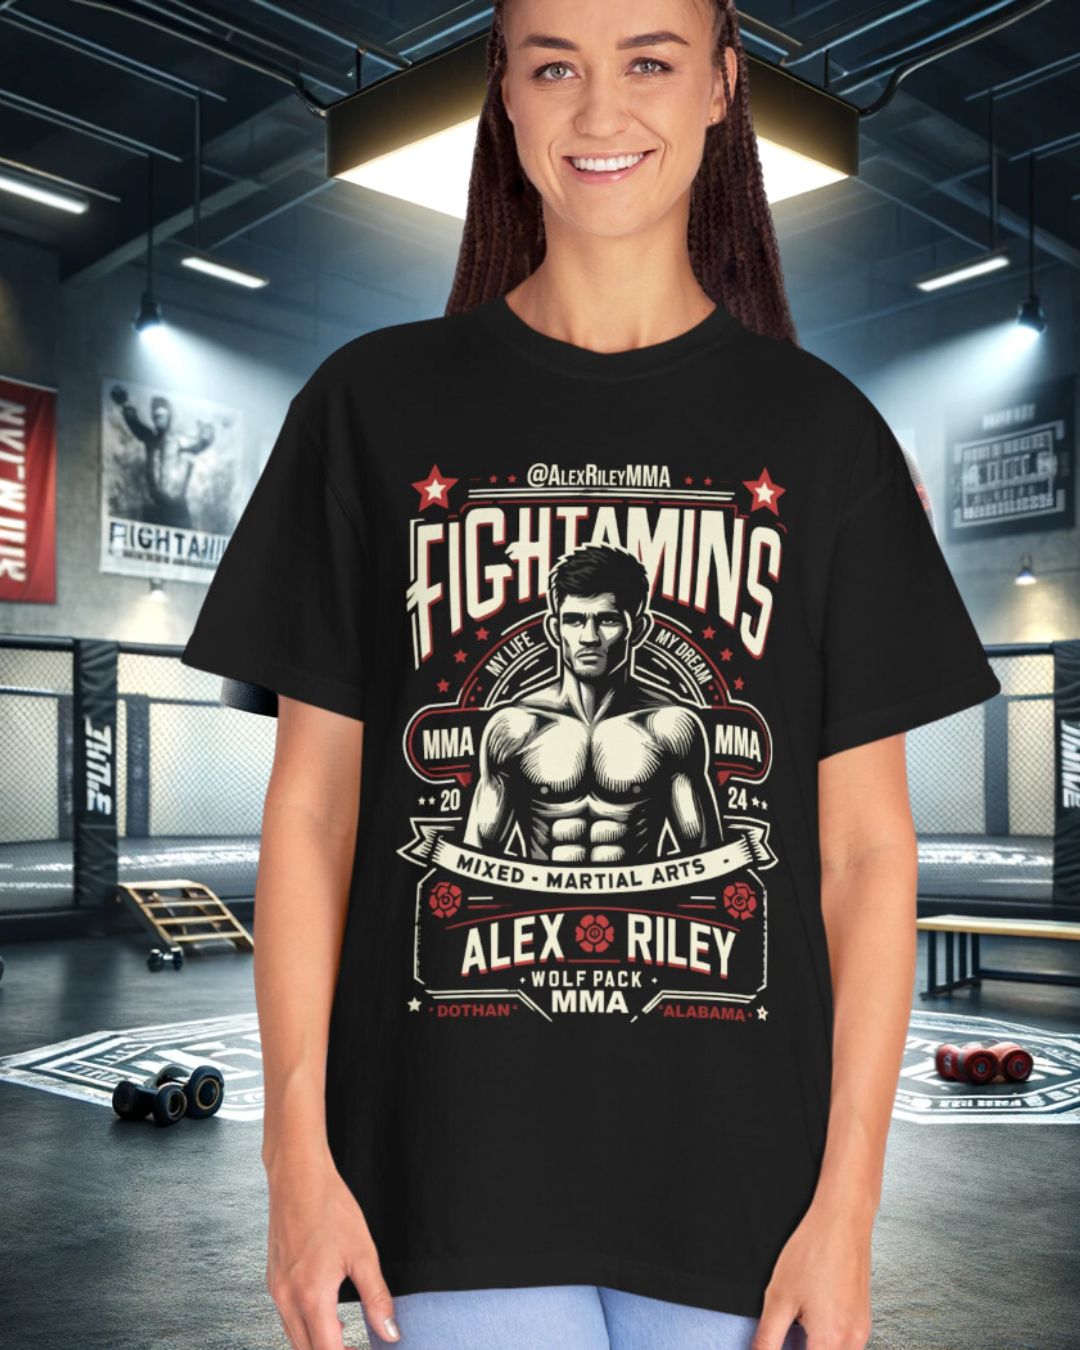 Join Team Riley: Get the Exclusive Alex Riley Walkout Tee